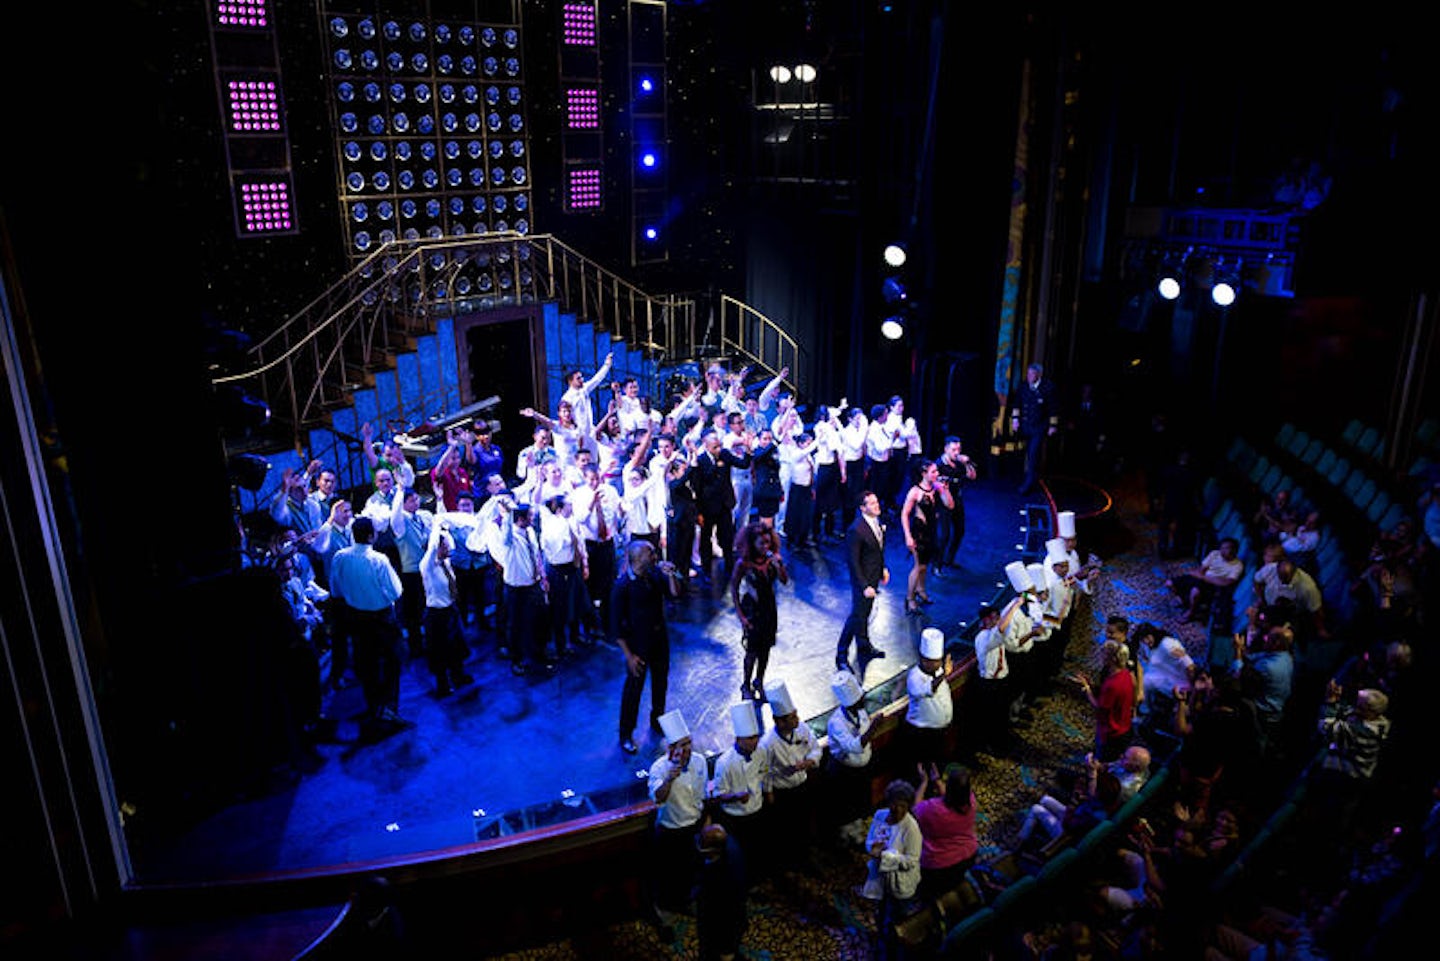 "Farewell Show" at Stardust Theater on Norwegian Pearl